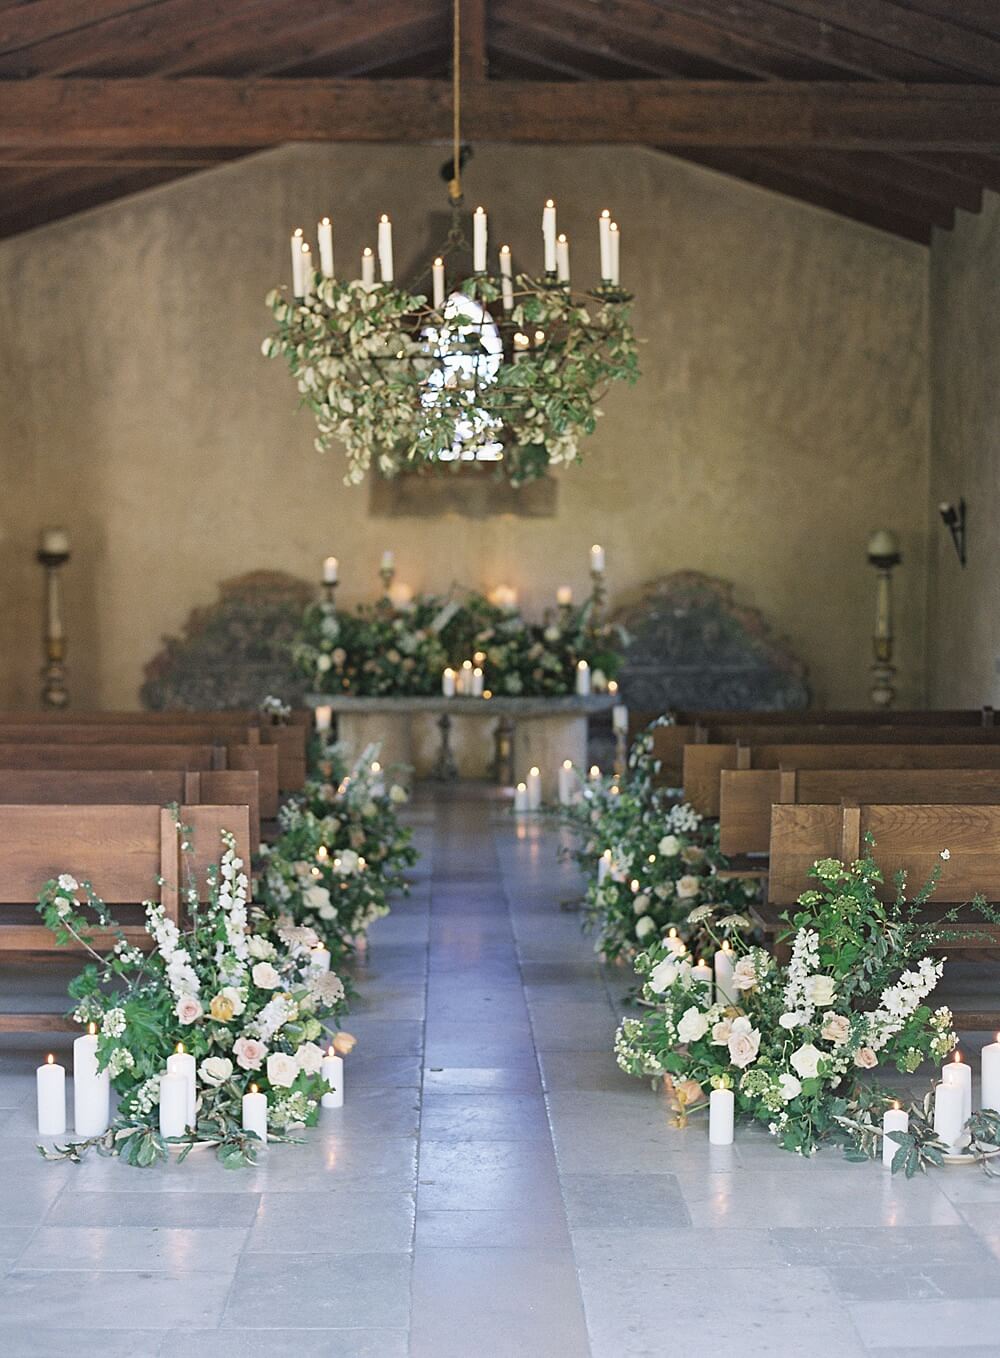 cal-a-vie wedding chapel with romantic florals lining the aisle and candlelit alter - Jacqueline Benét